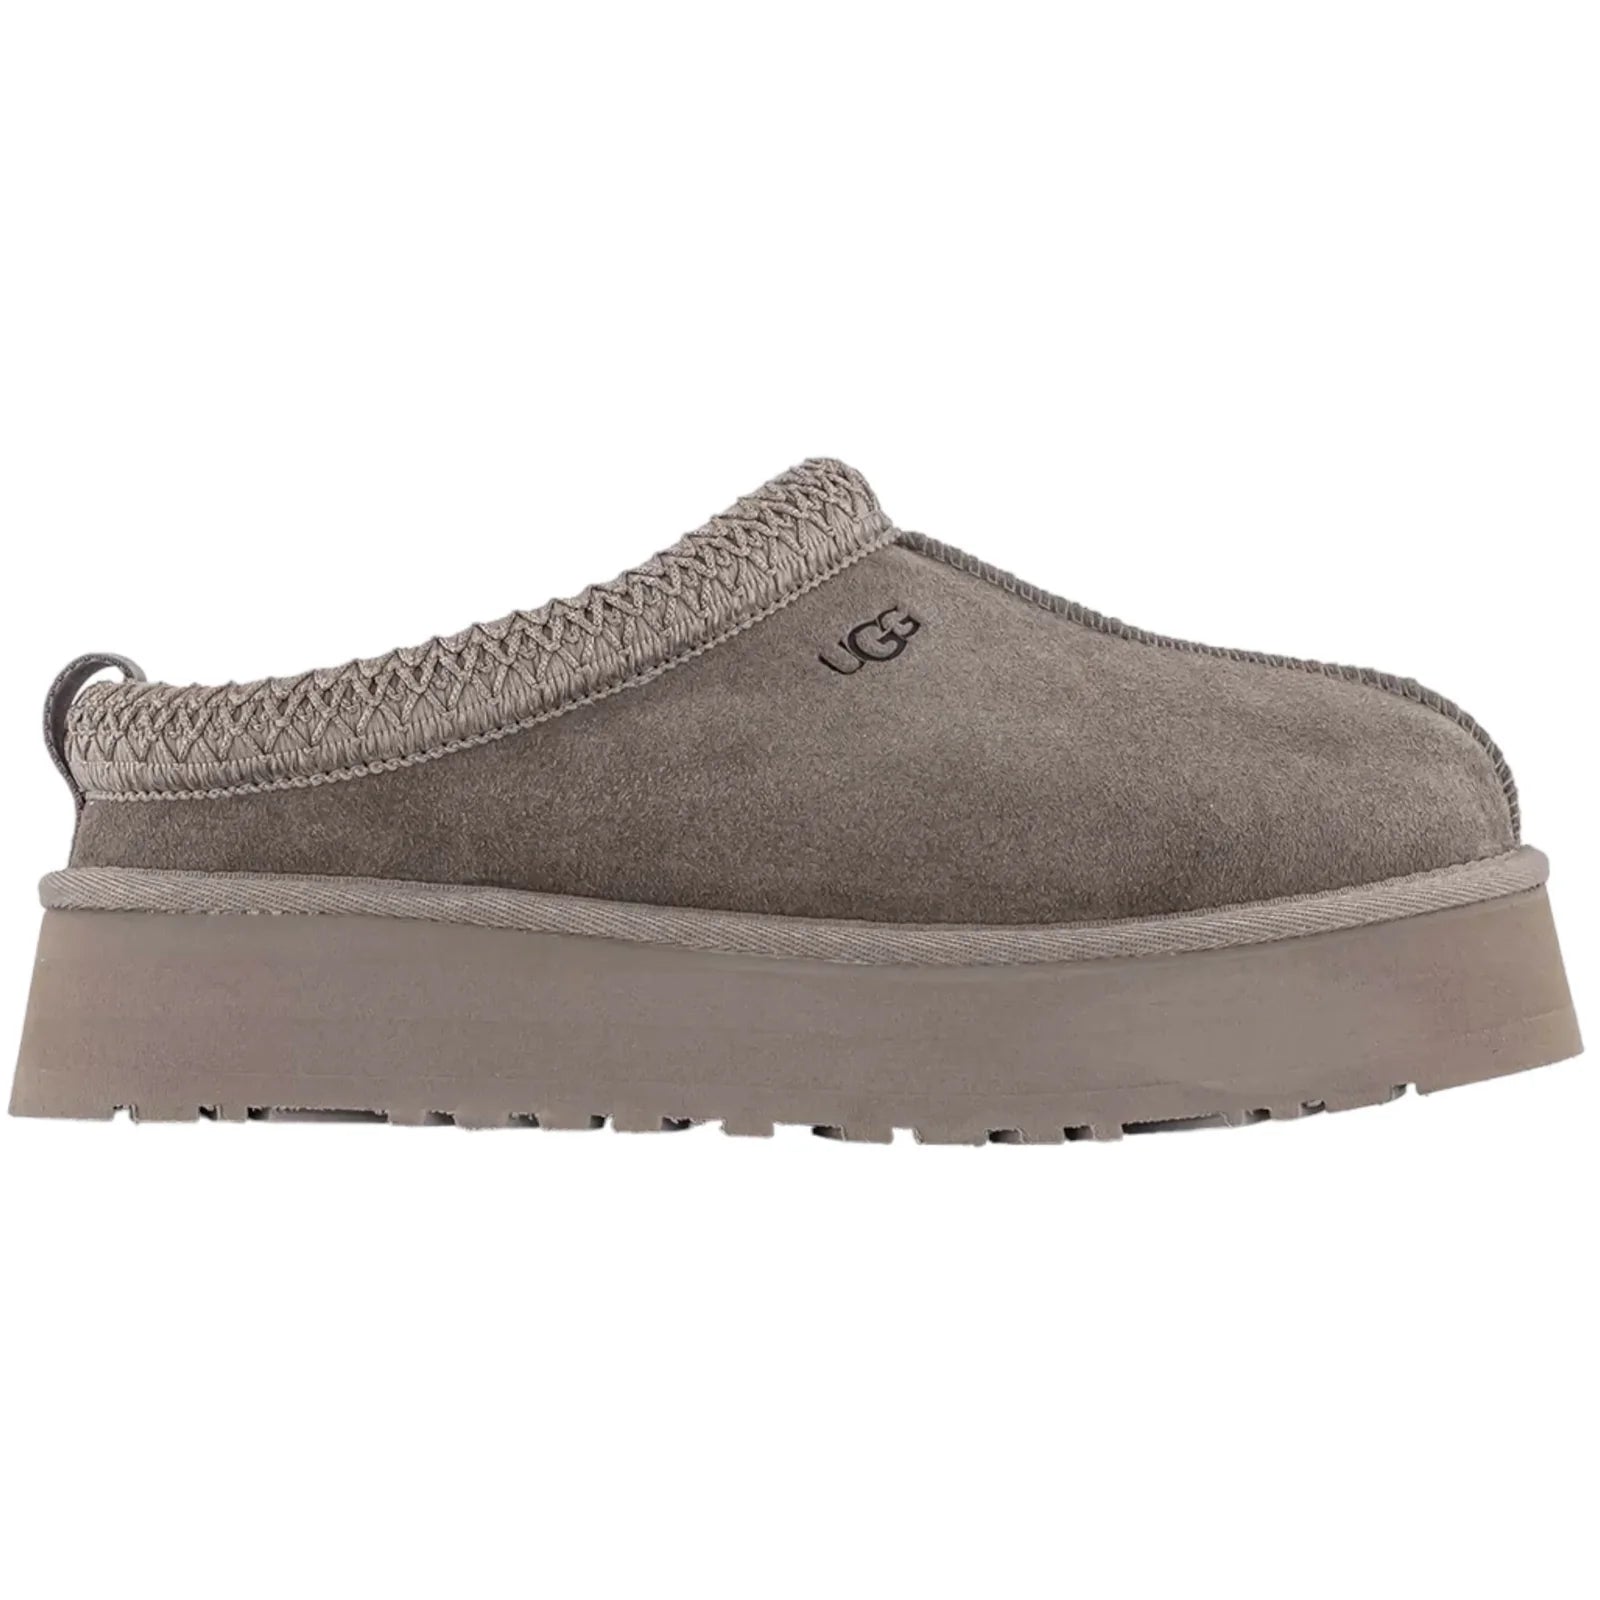 UGG Tazz Slipper Smoke Plume (W) – What's Your Size UK